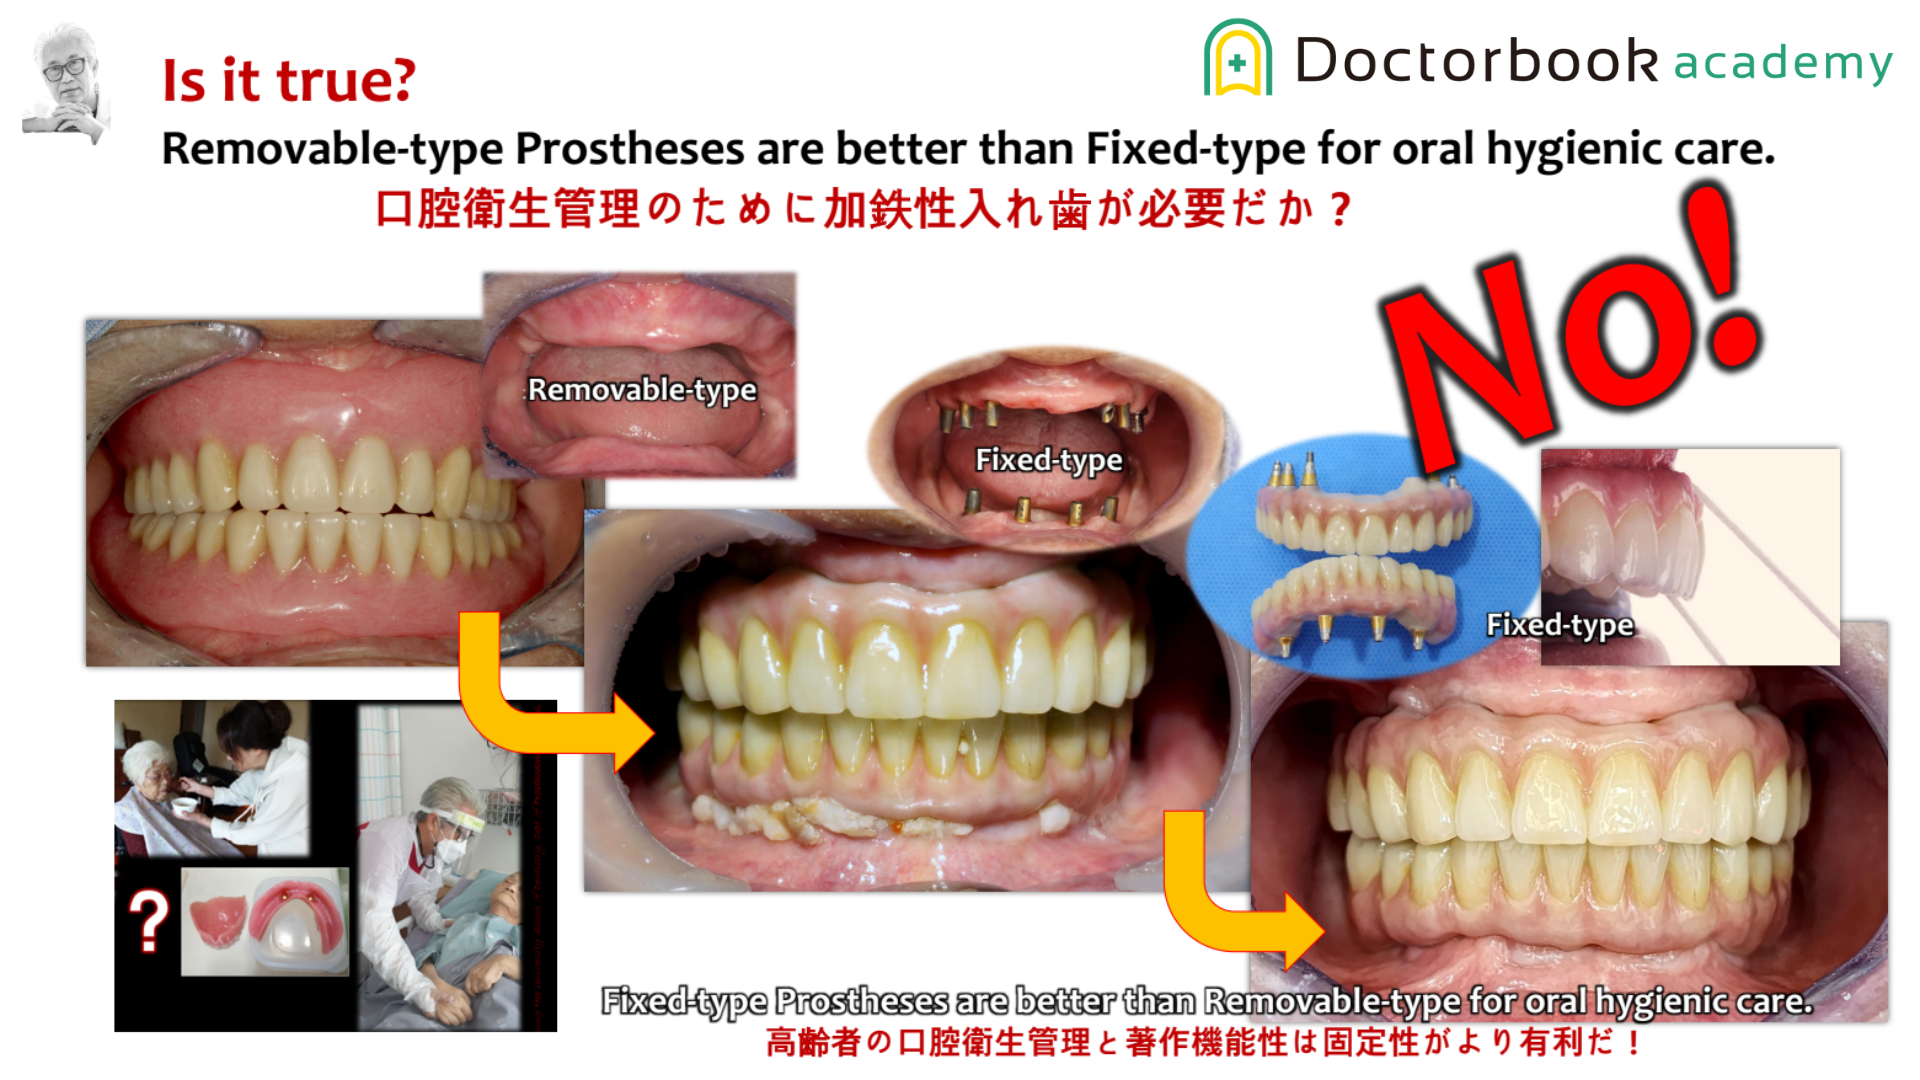 Elderly edentulous transition from Complete Dentures to Fixed hybrid prosthesis, Mutually Protected Occlusion for Fixed Prostheses and Considerations（Part 3）